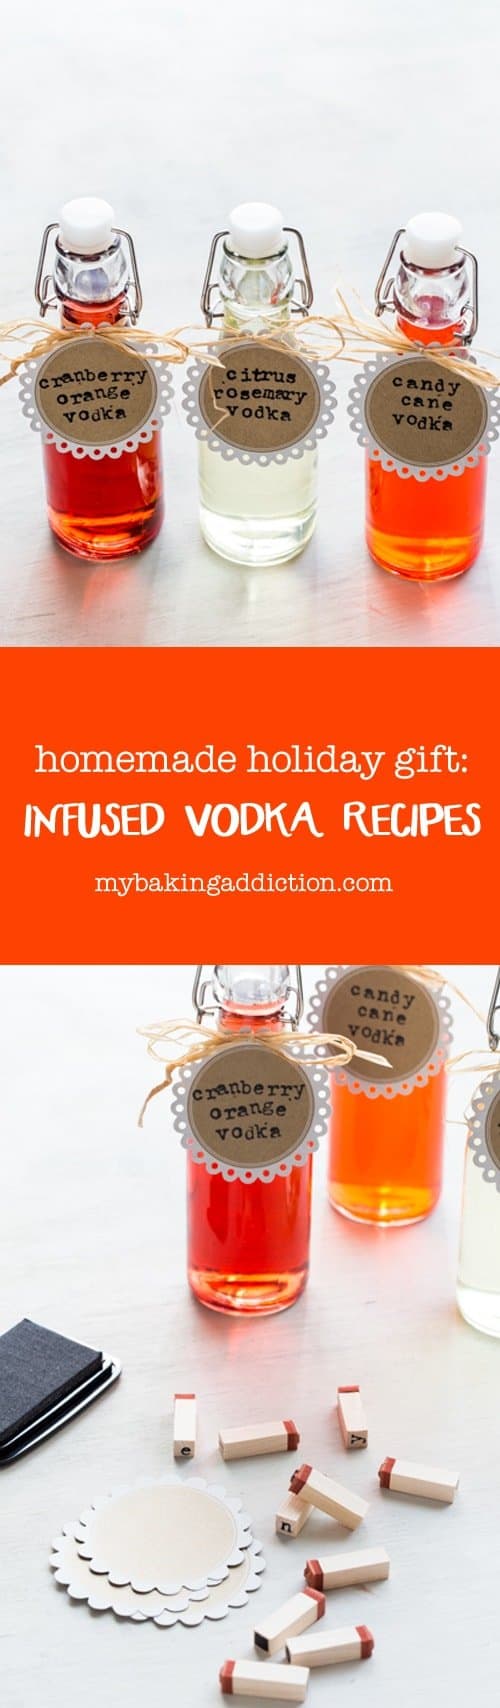 3 Infused Vodka Recipes! This  is the perfect homemade holiday gift for friends and neighbors. Grab a bottle of high-quality vodka and get creative!